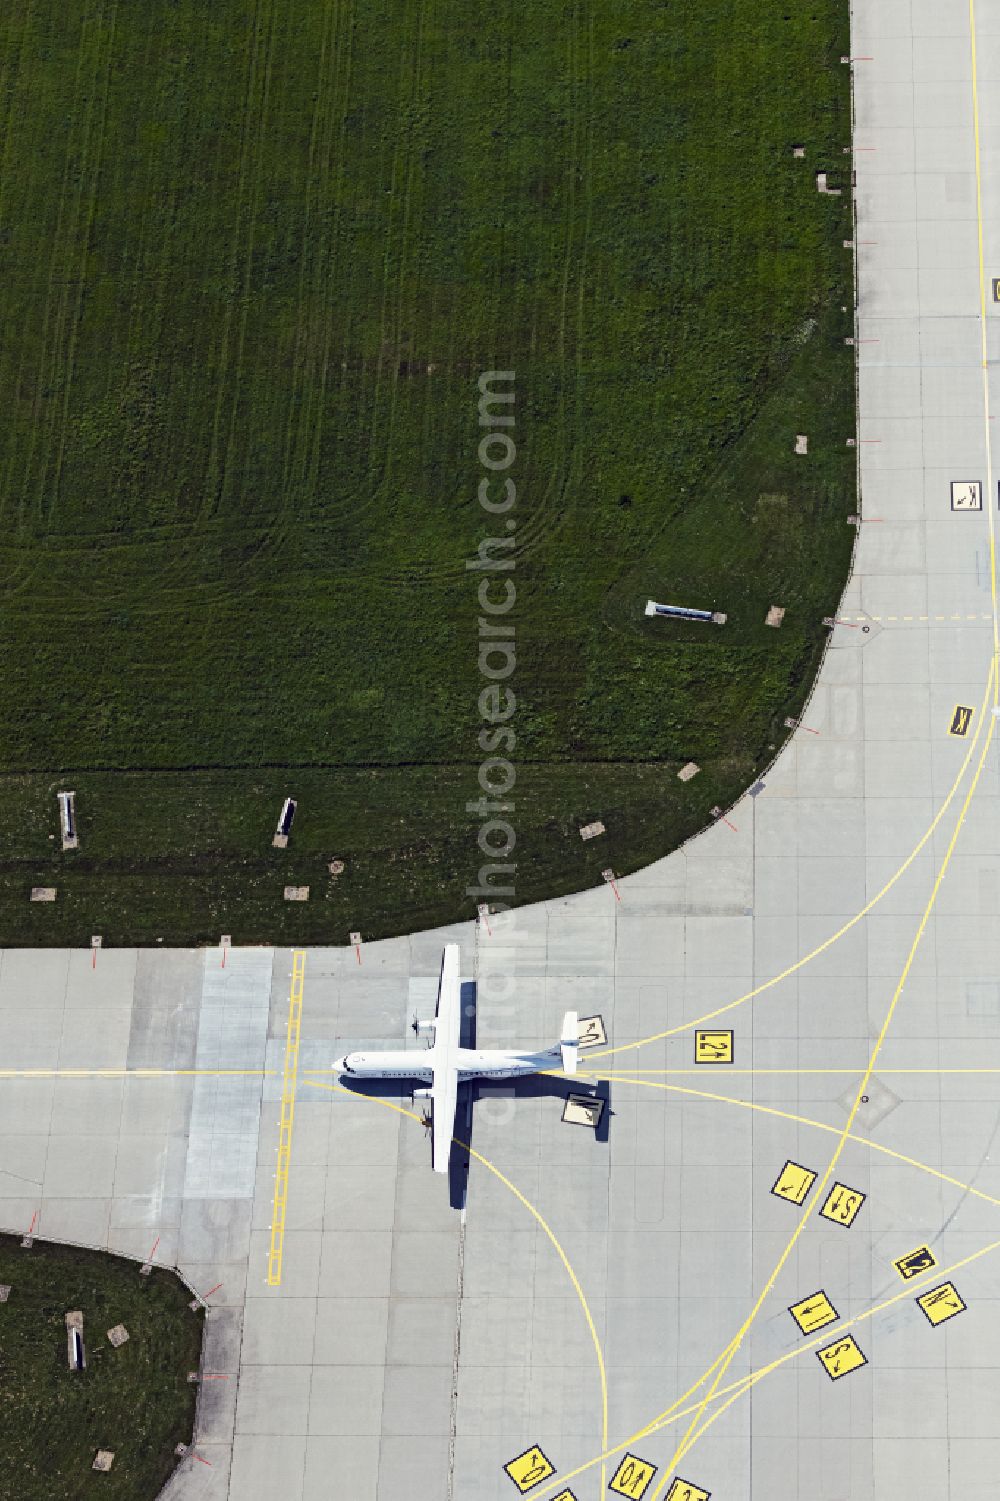 Aerial photograph Filderstadt - Airliner- Passenger aircraft of Luebeck Air rolling on the apron of the airport in Filderstadt in the state Baden-Wuerttemberg, Germany